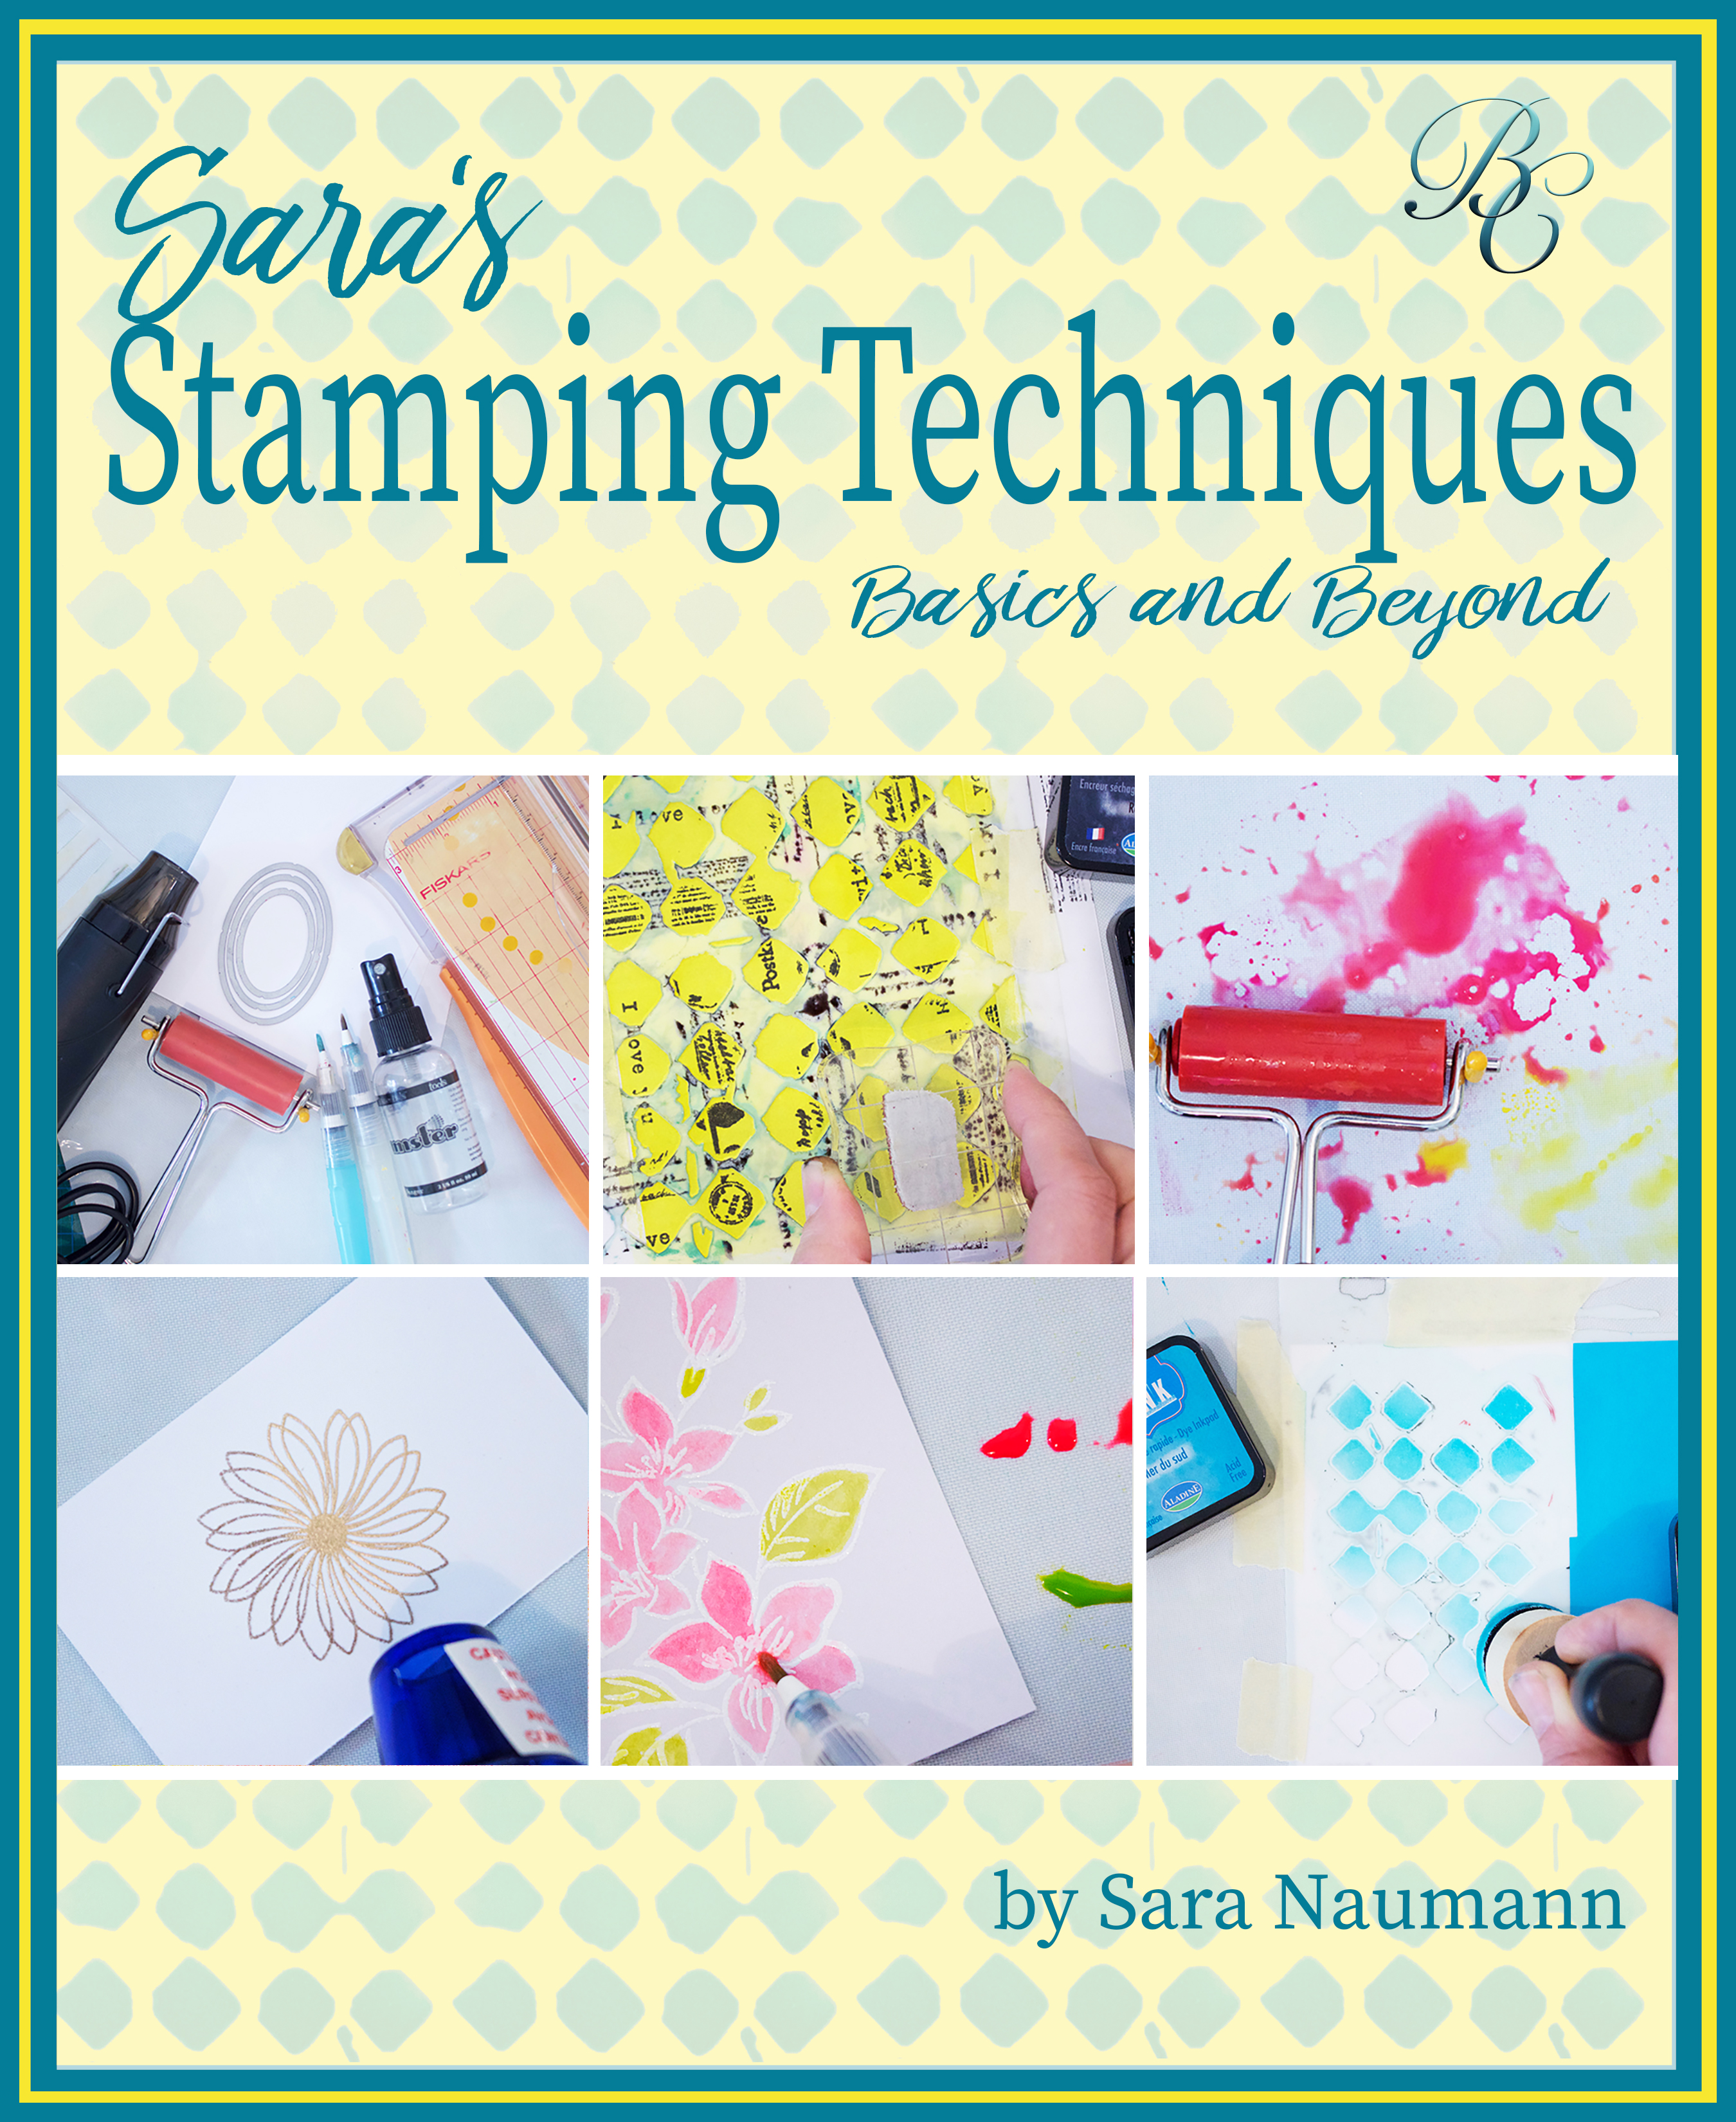 Sara's Stamping Techniques Cover